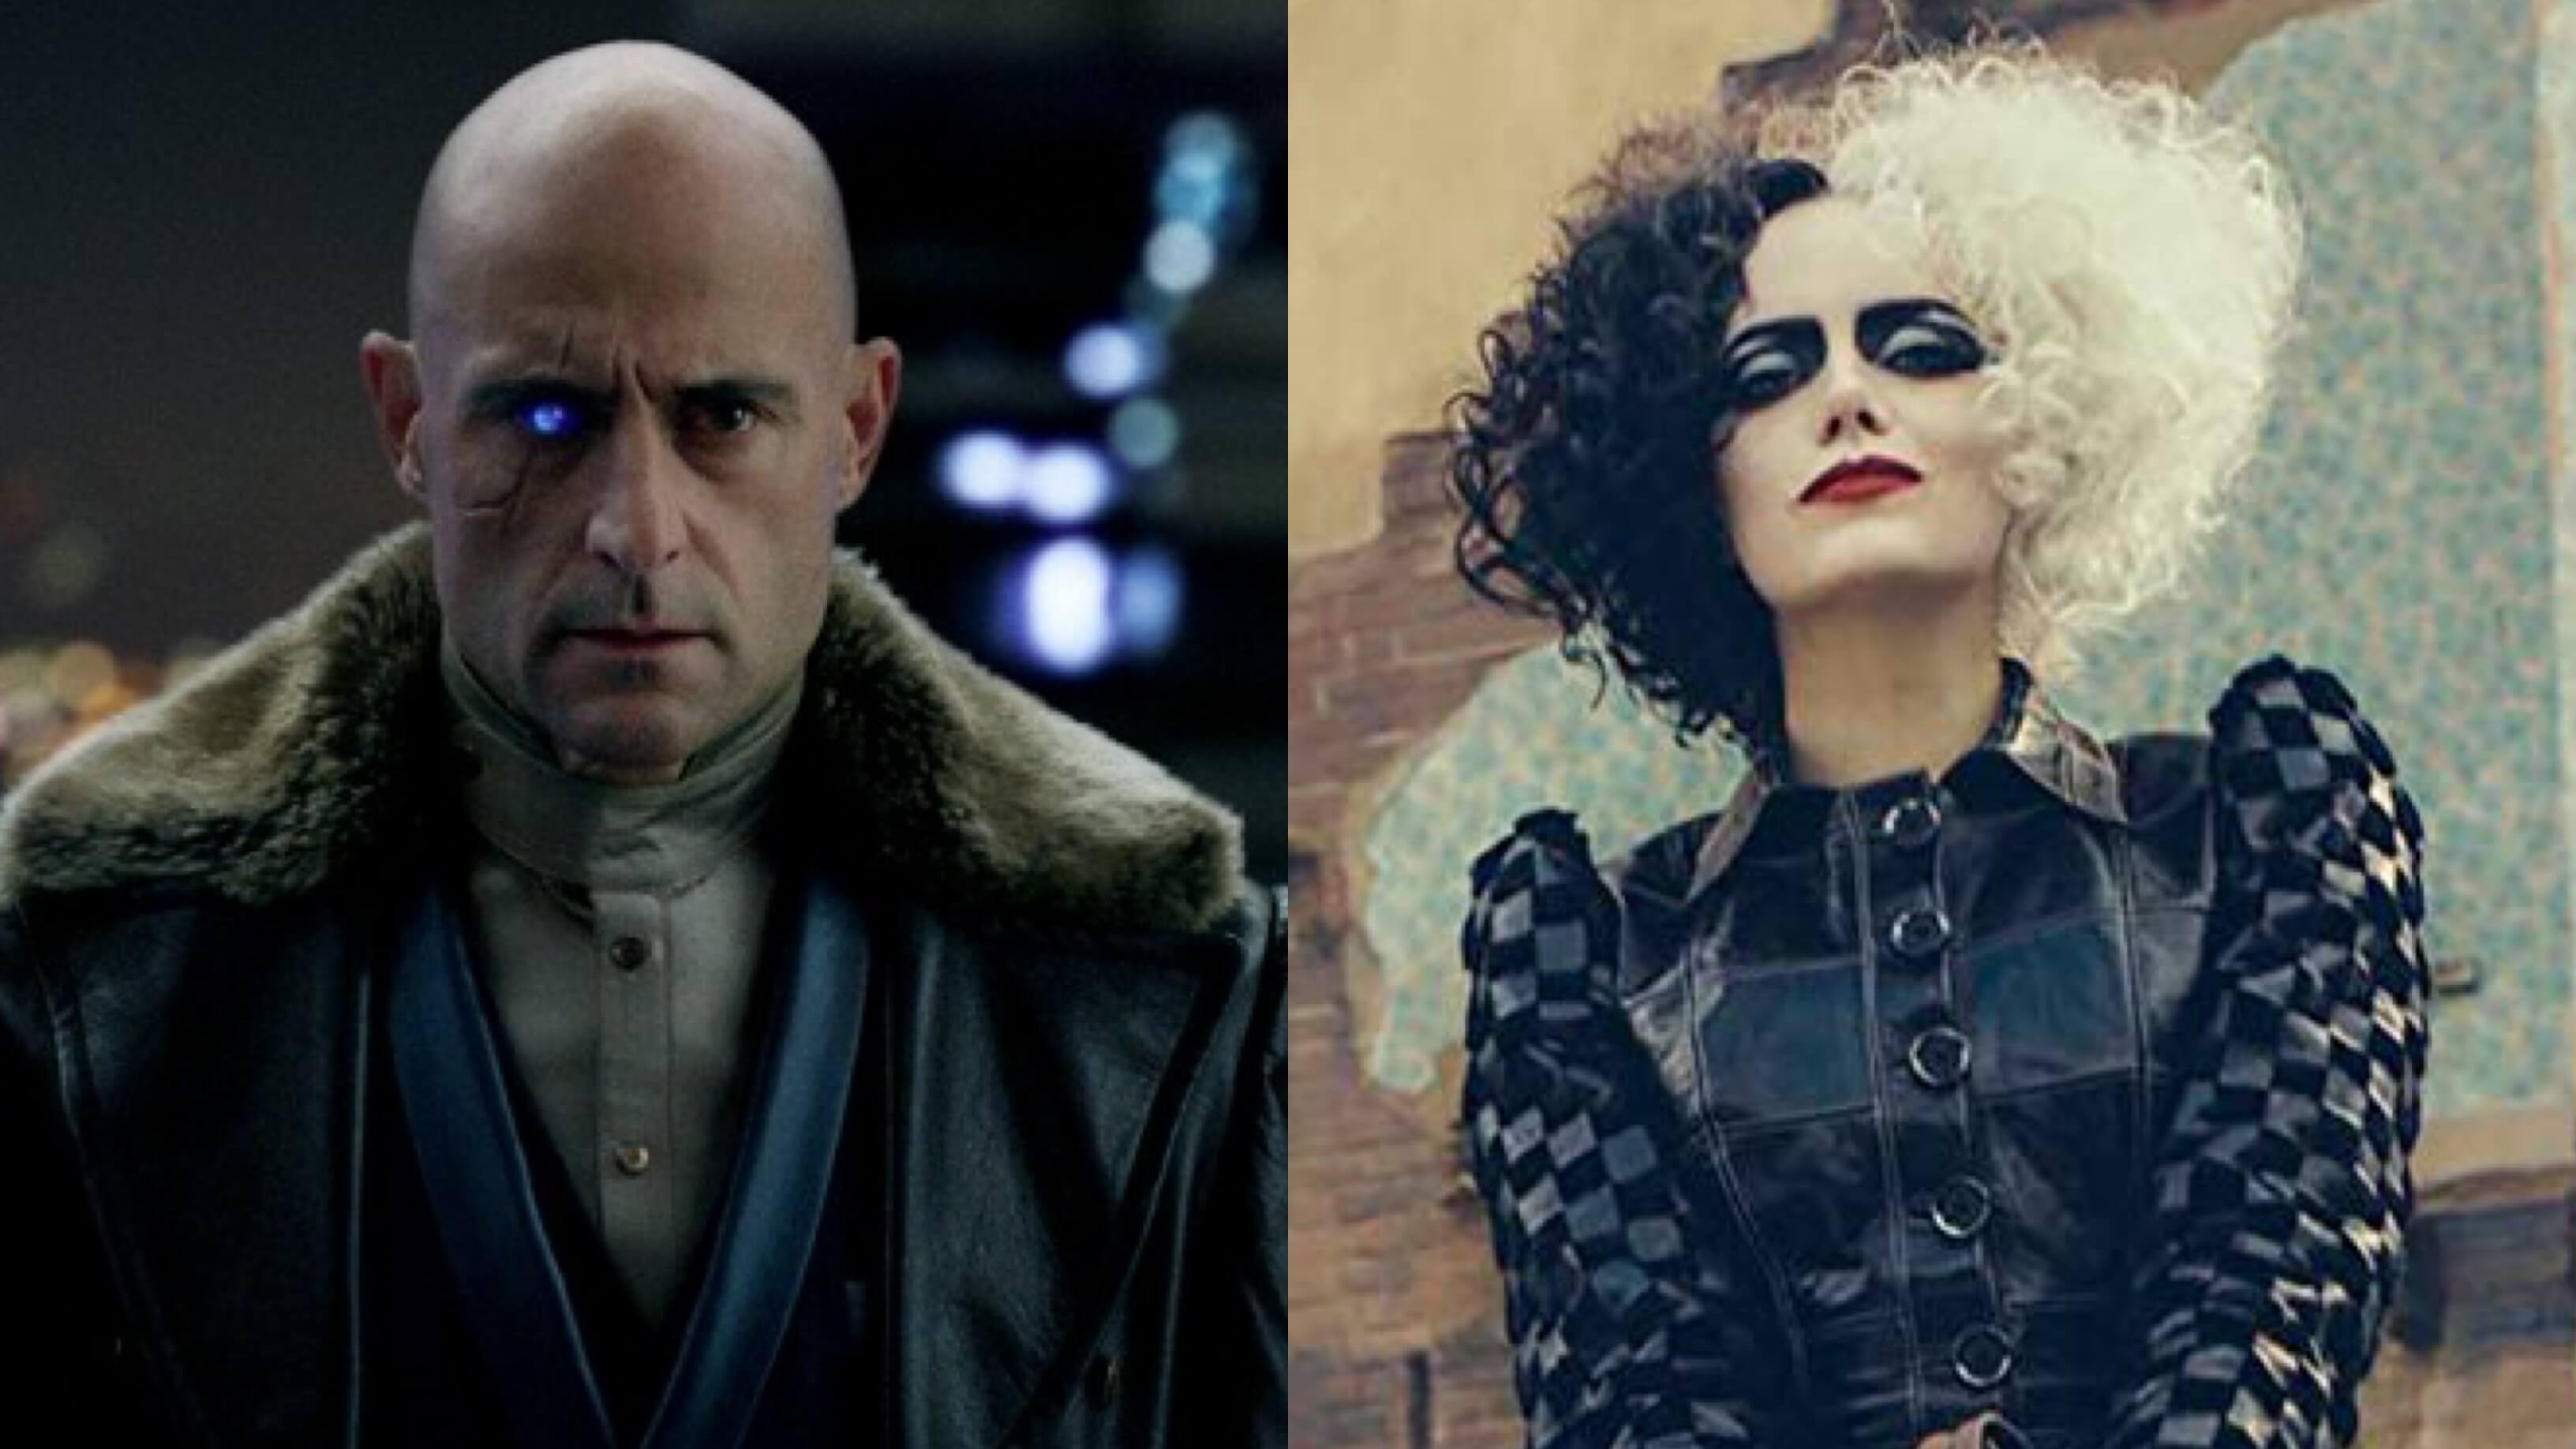 RUMOR: Mark Strong Joins Emma Stone In ‘Cruella’ As The Baron